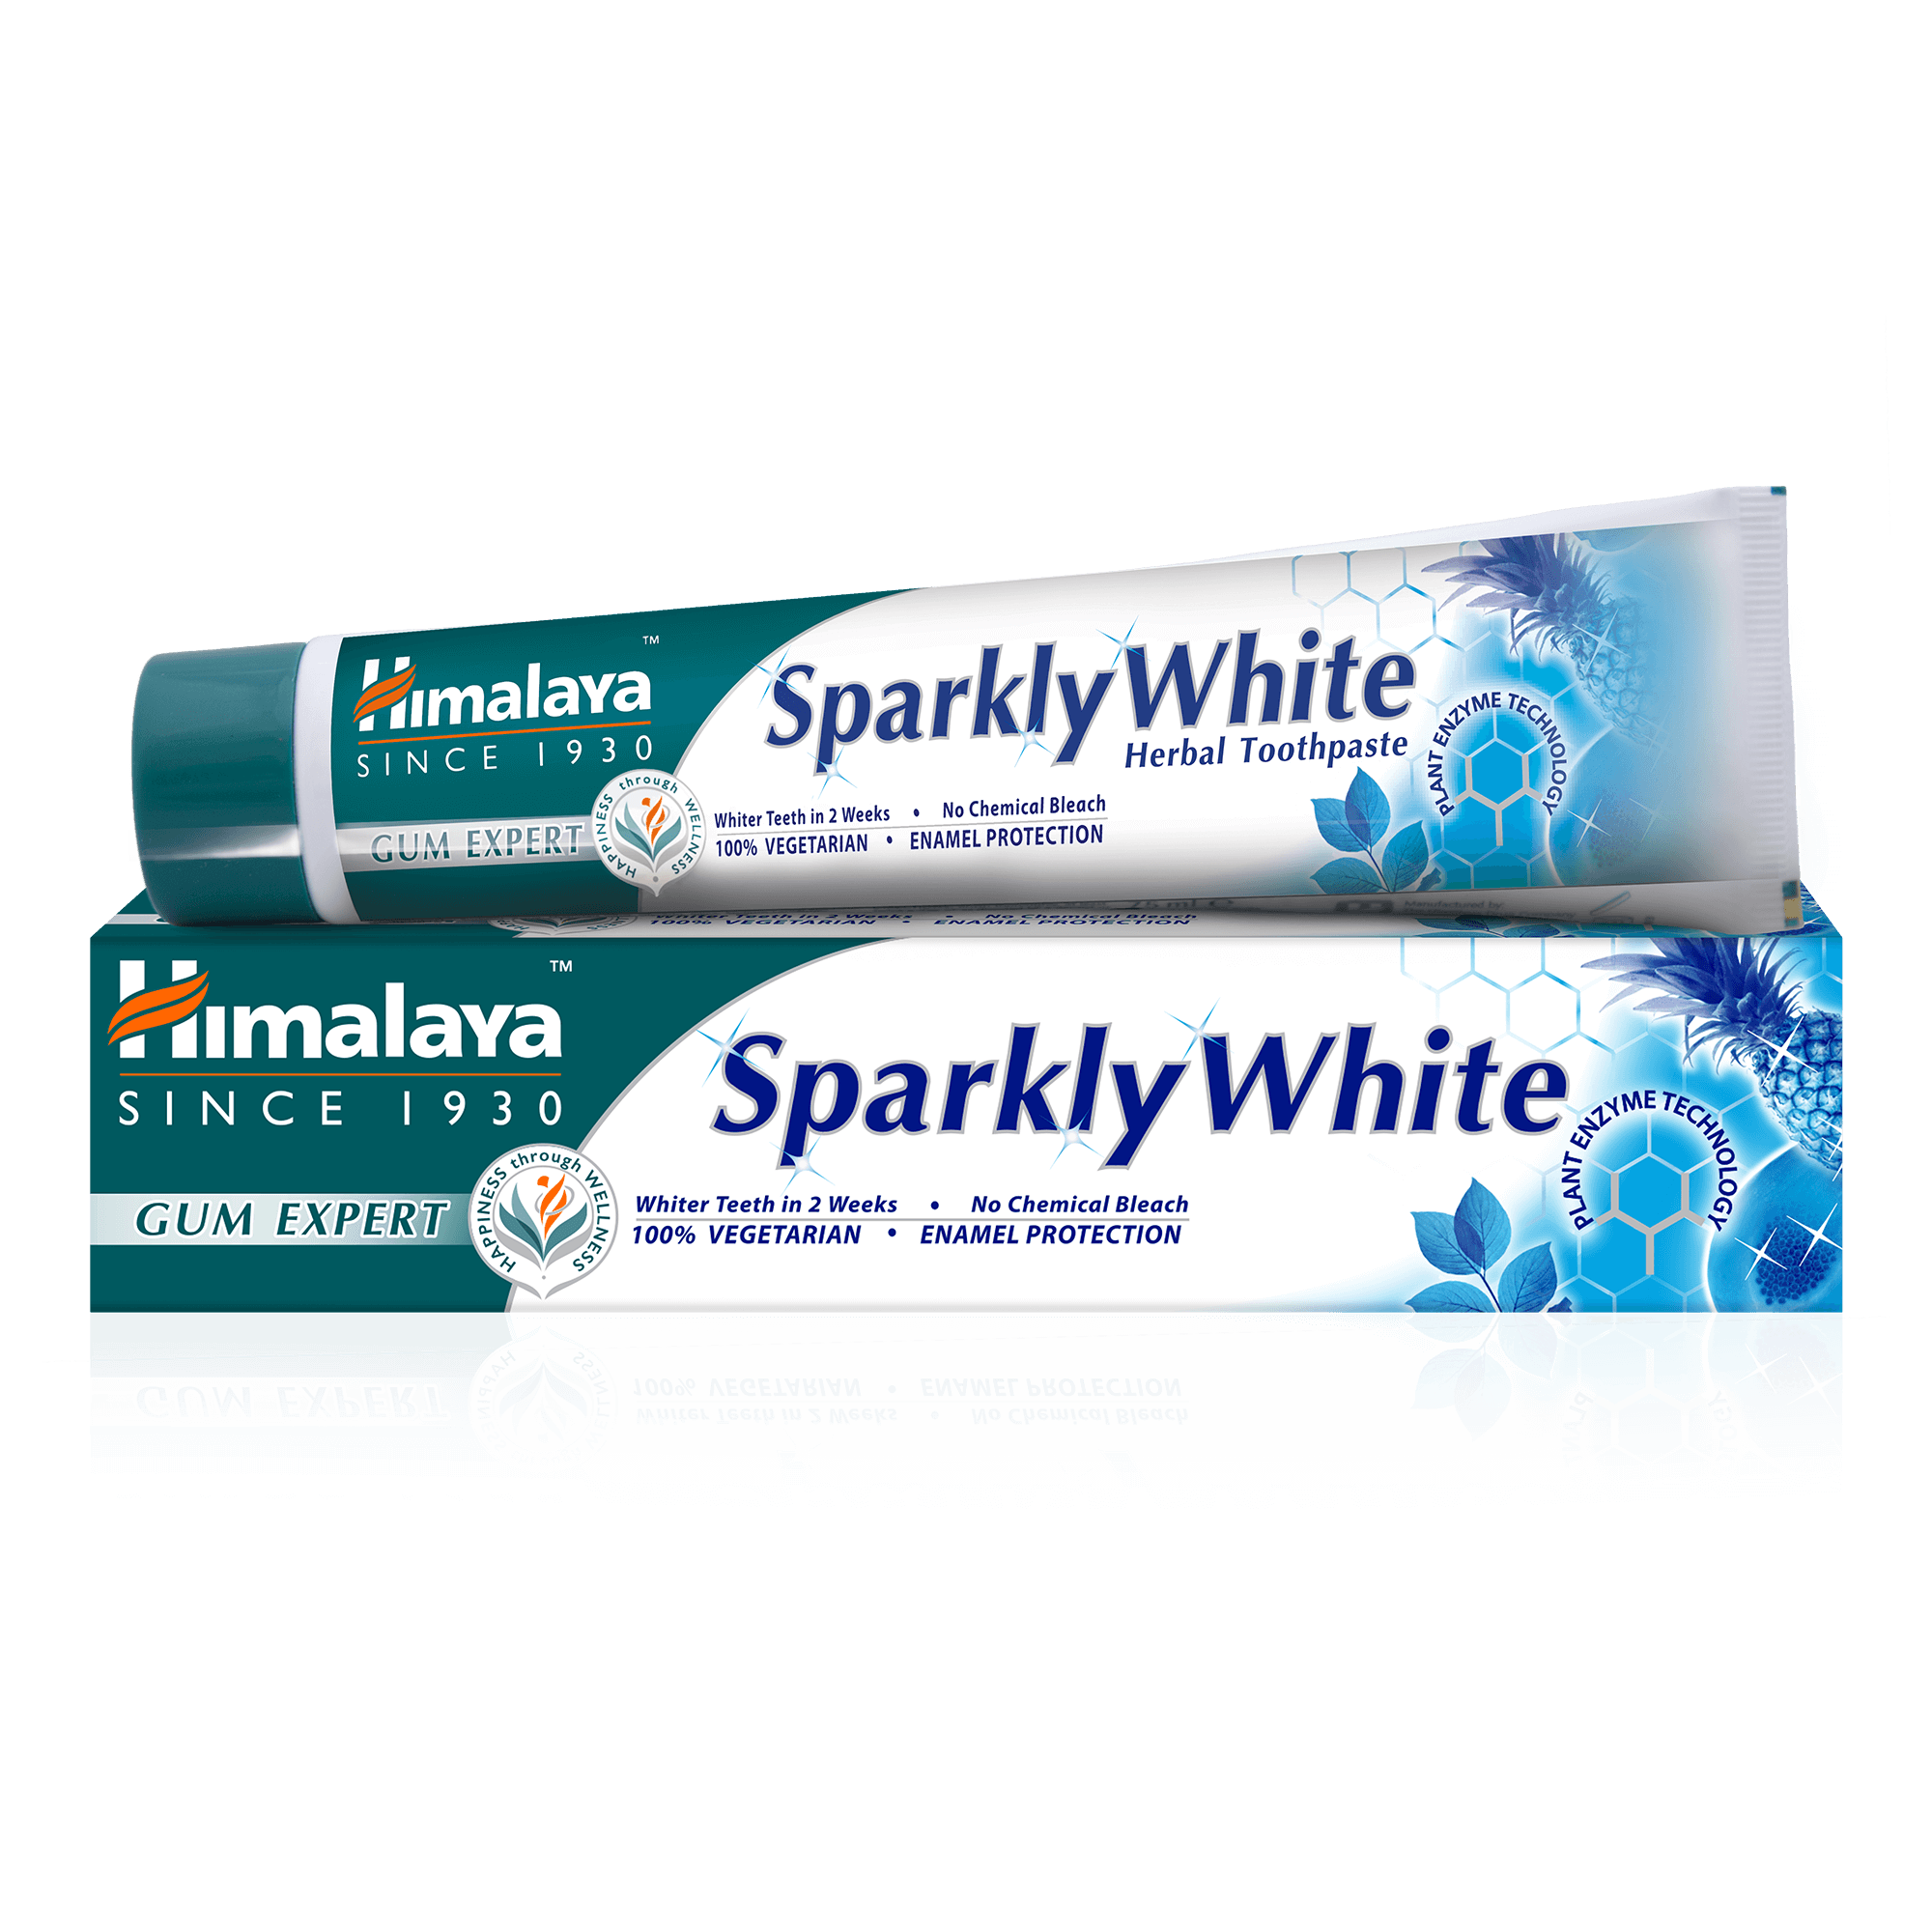 Himalaya Sparkly White - Gum Expert Herbal Toothpaste Tube and Pack